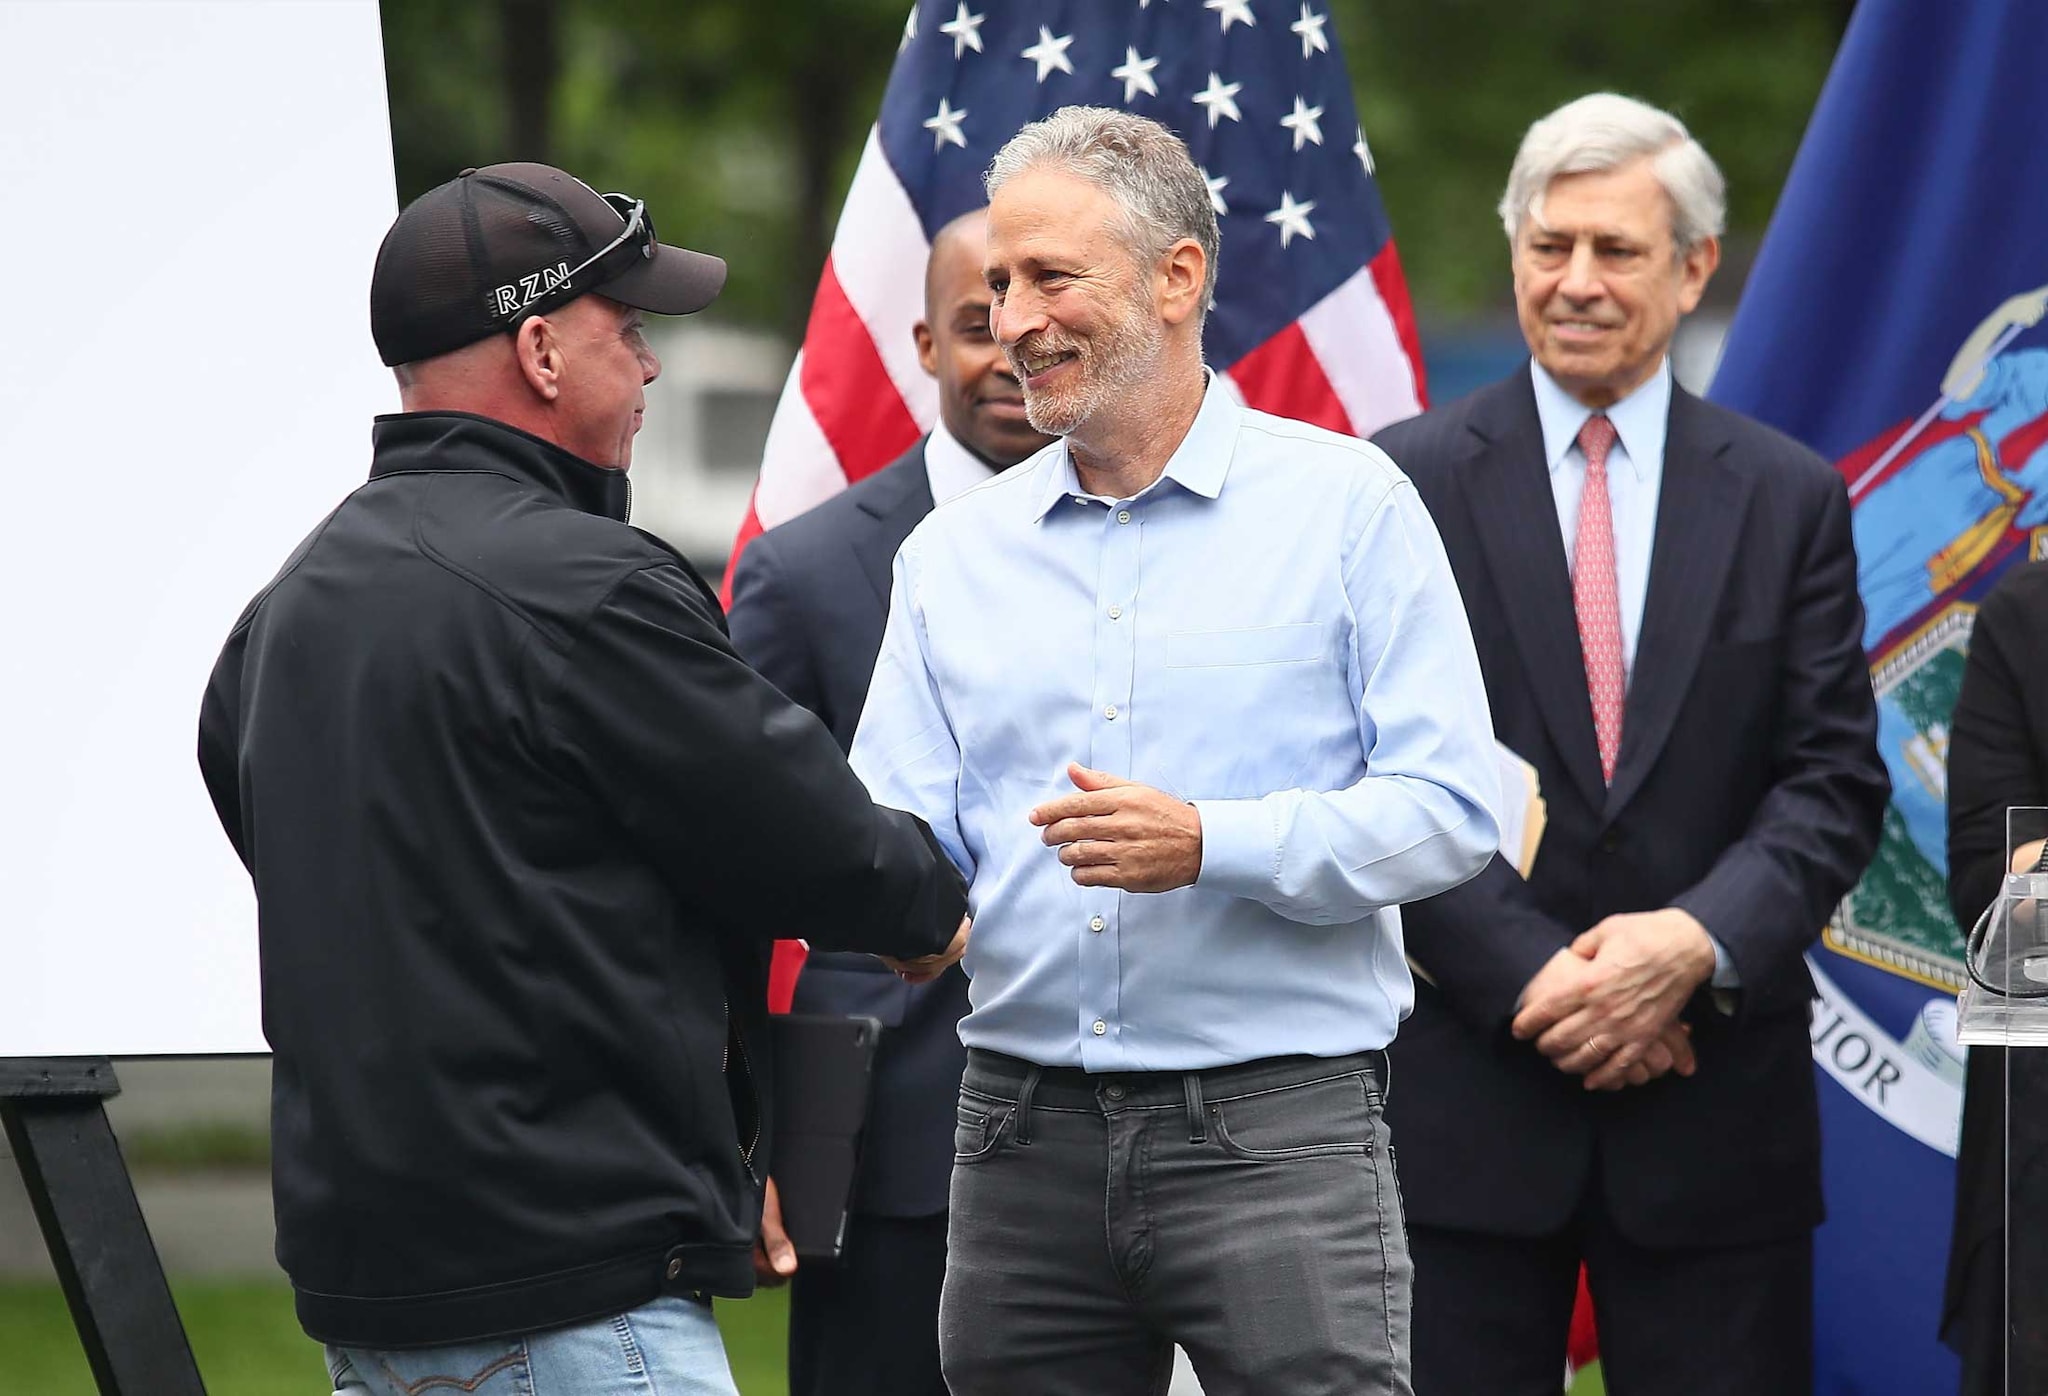 Actor/comedian Jon Stewart (right) greets John Feal (left), the founder of the FealGood Foundation, during the design unveiling of a memorial to honor 9/11 rescue workers on May 30, 2018, in New York City.